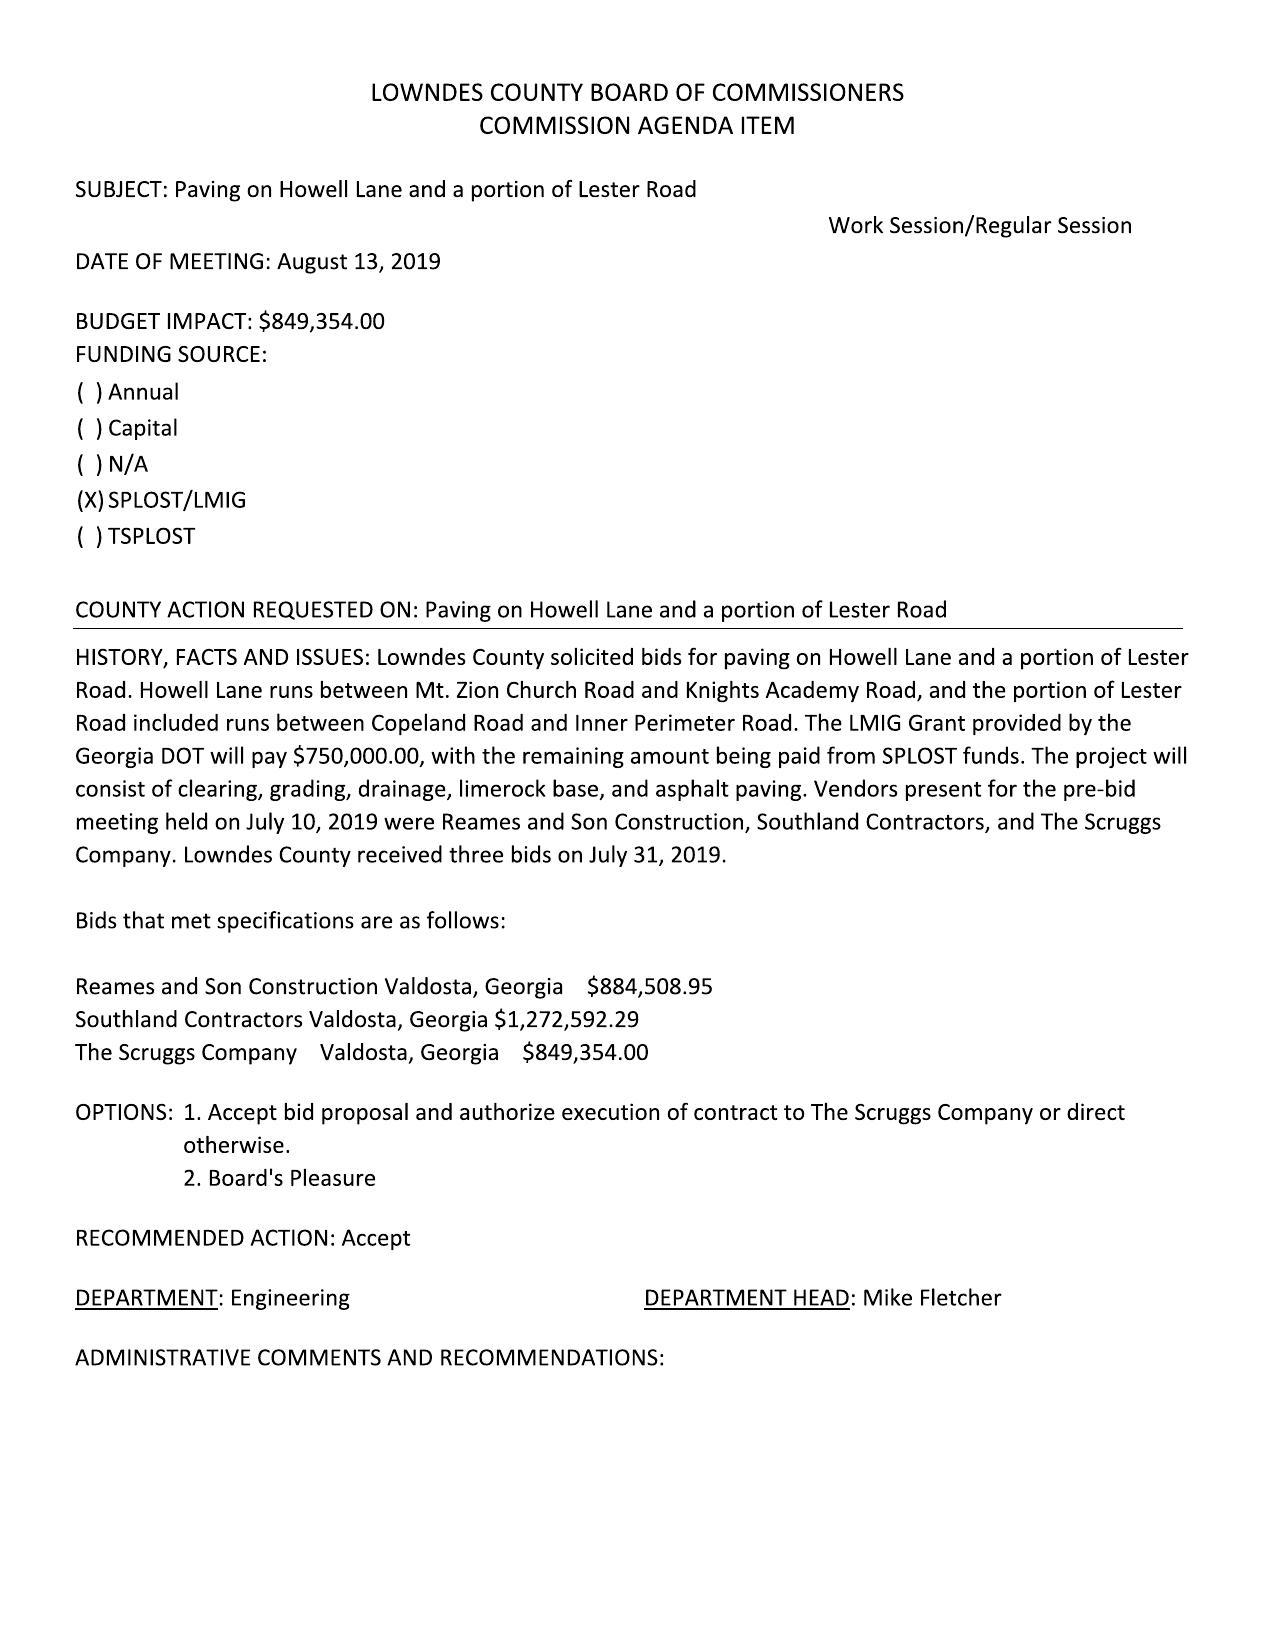 Paving on Howell Lane and a portion of Lester Road Work Session/Regular Session DATE OF MEETING: August 13, 2019